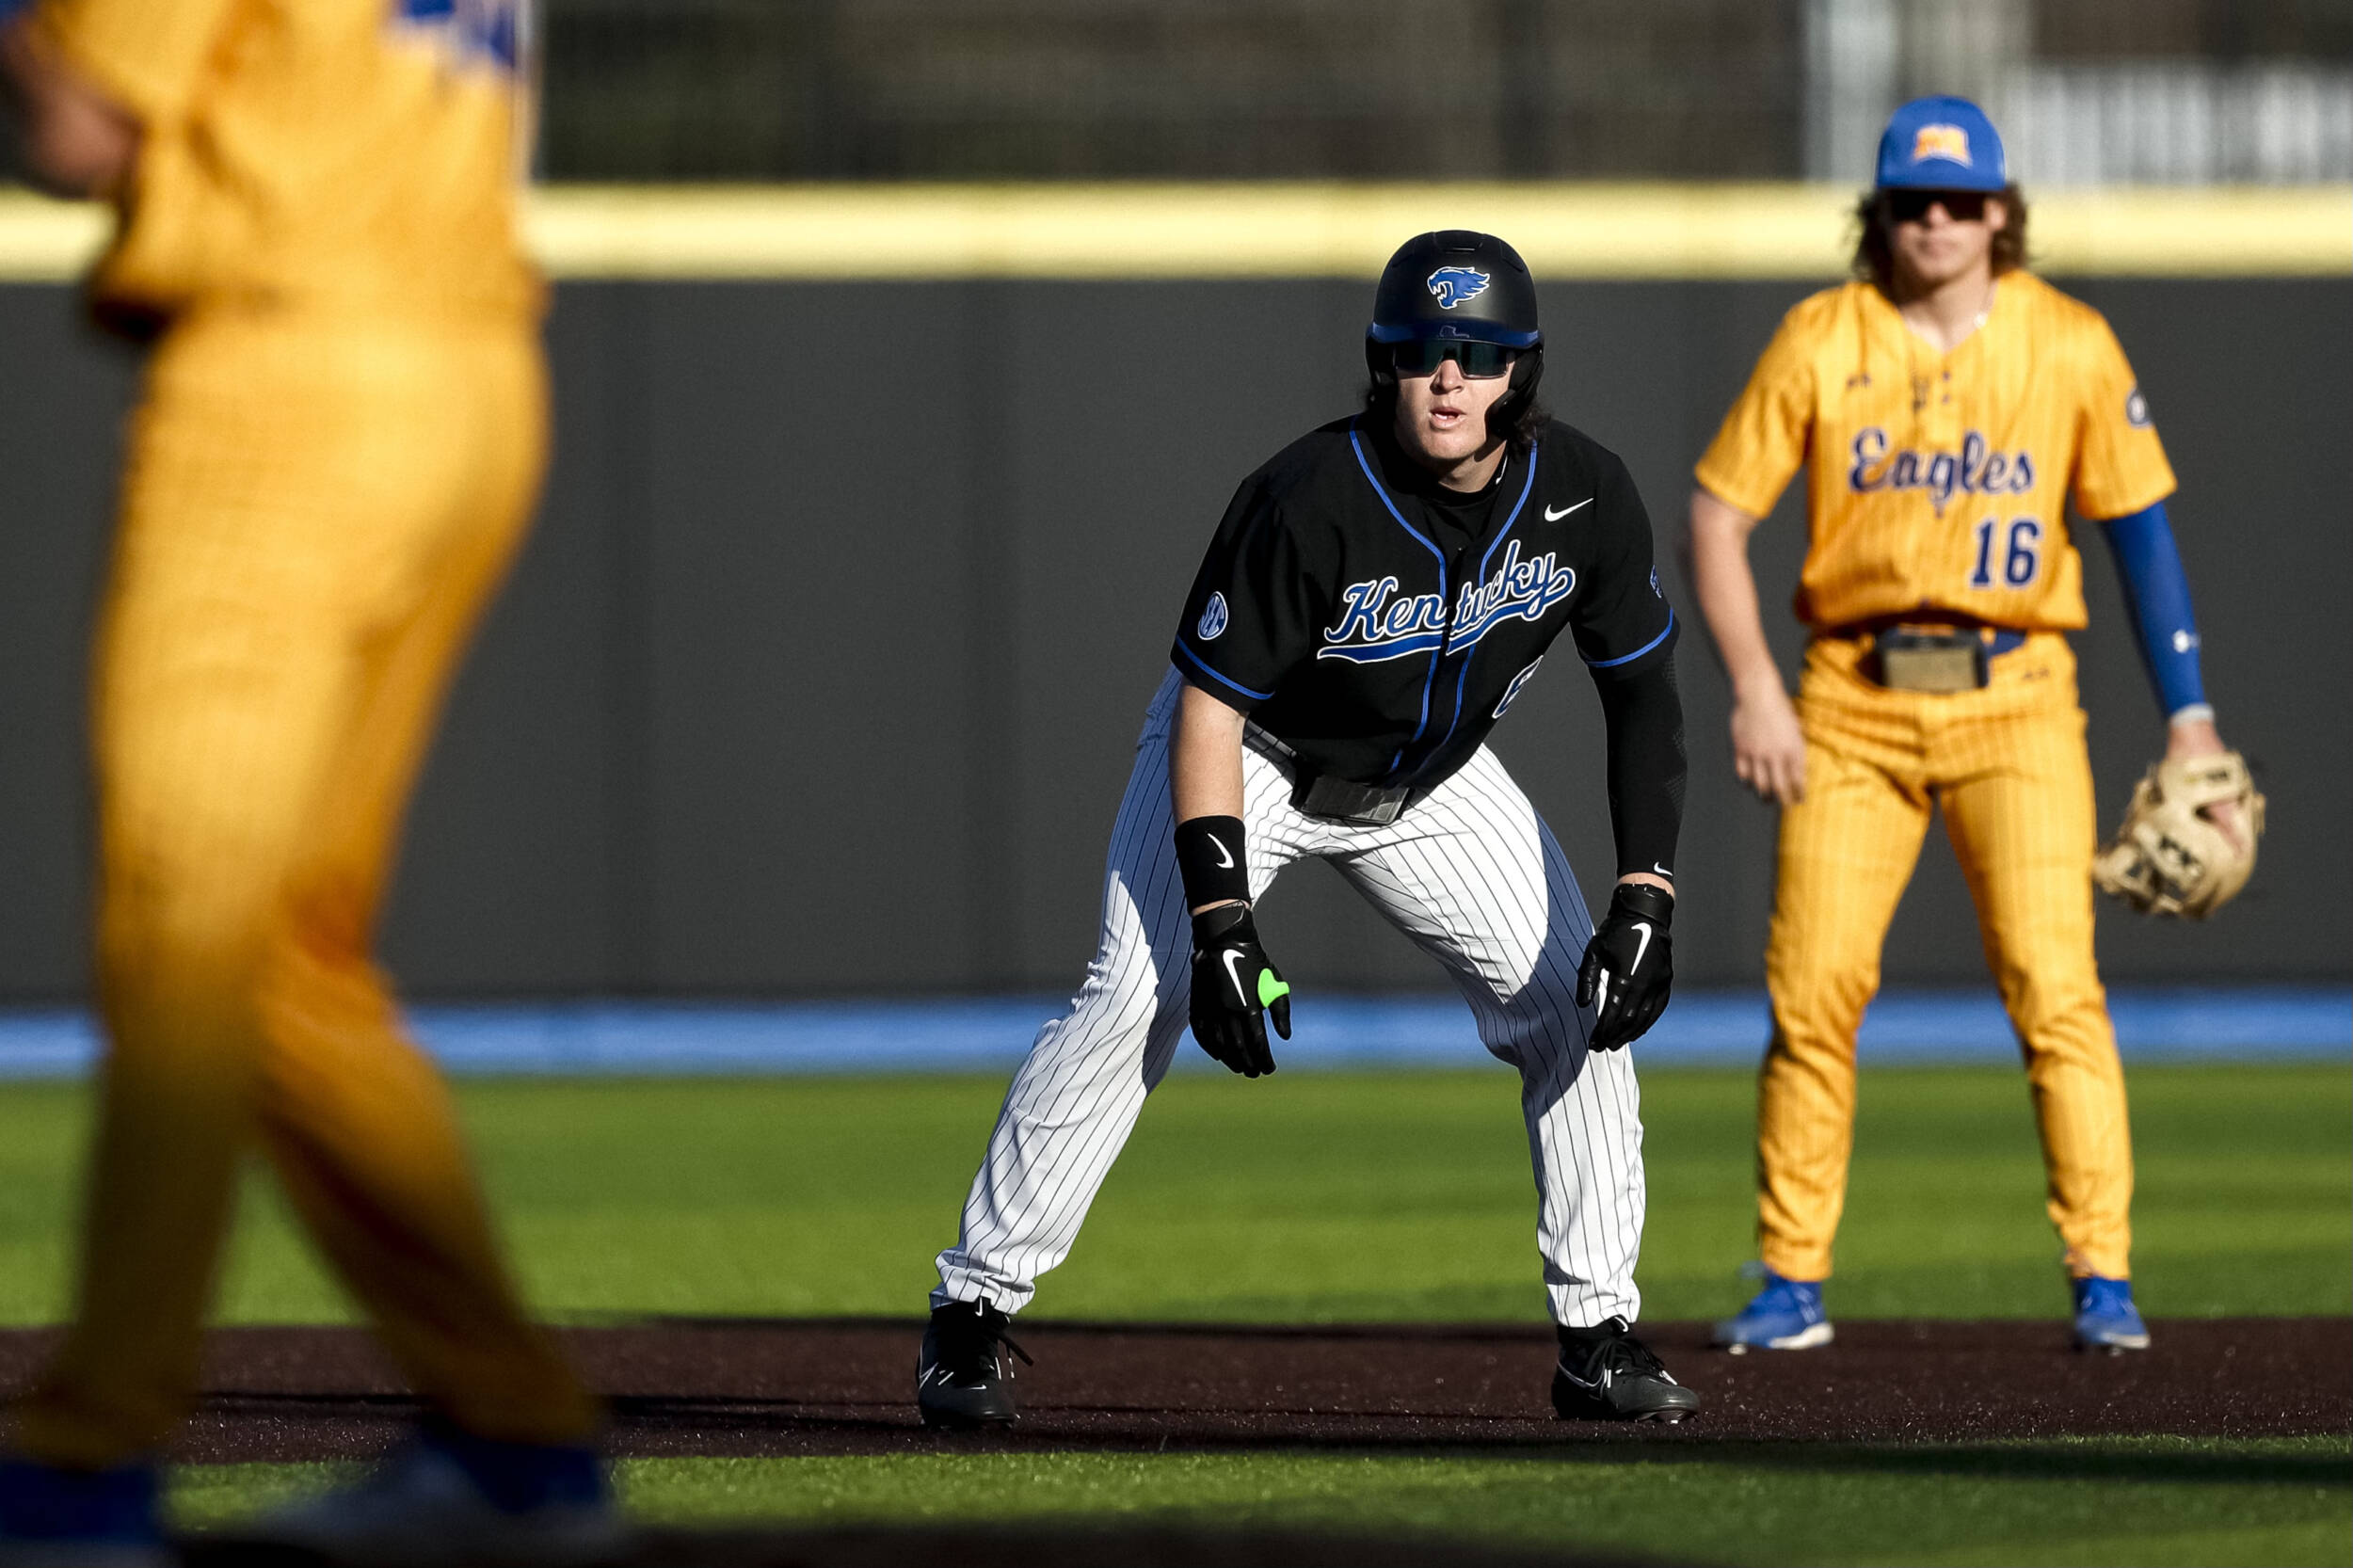 Walk This Way: Kentucky Takes Advantage of Free Bases in Win